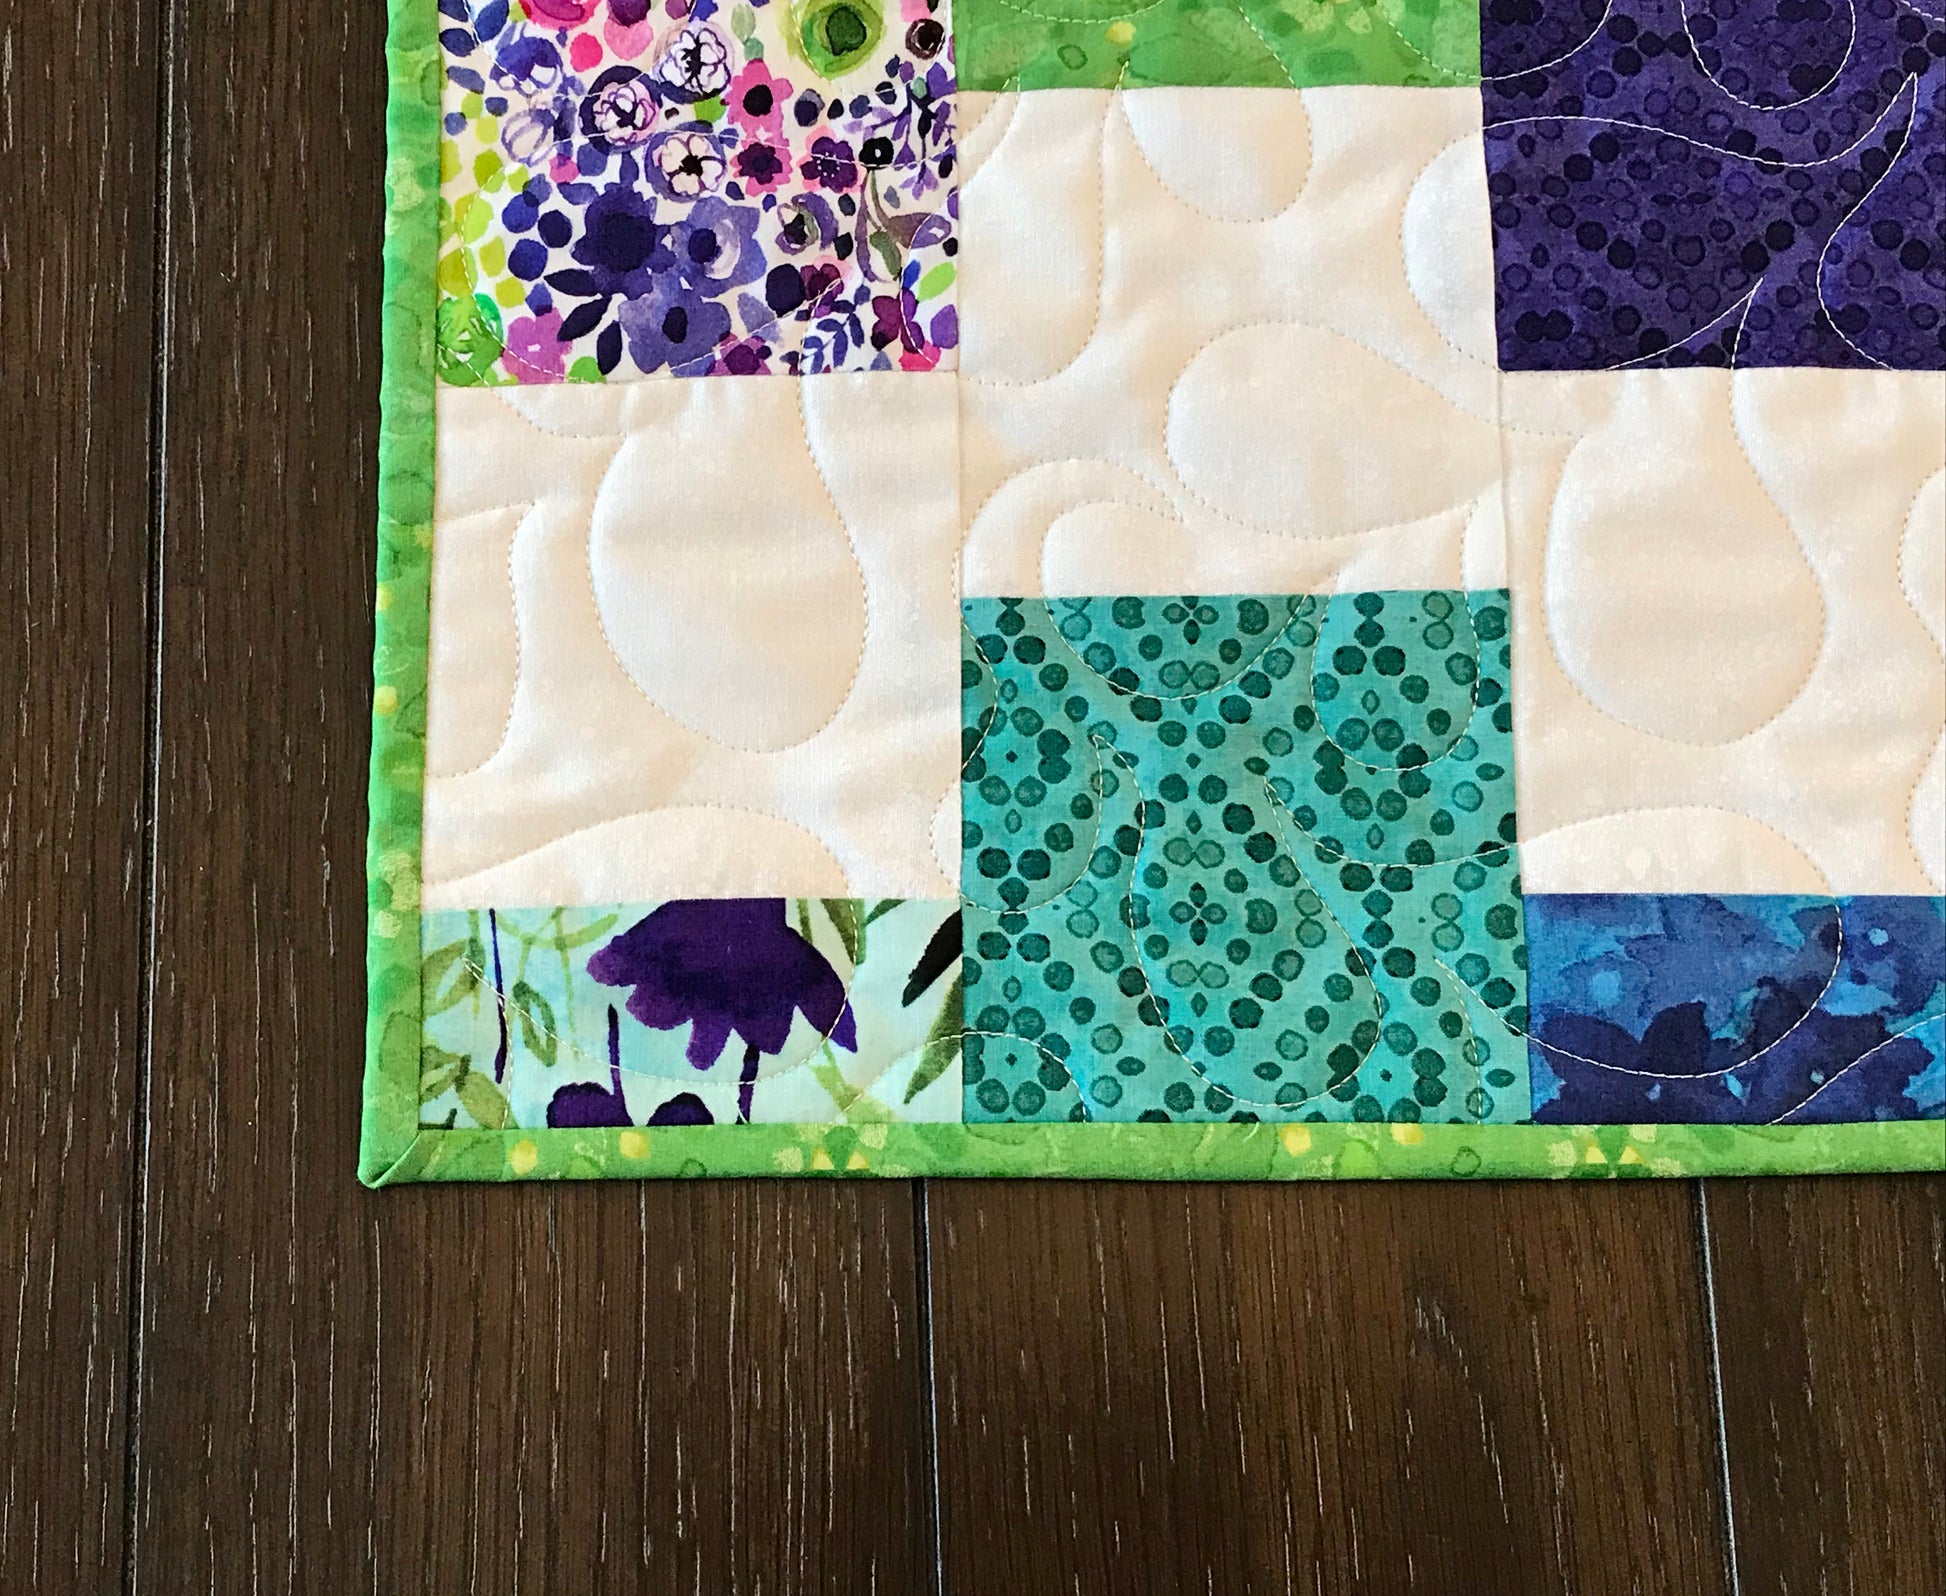 Watercolor Floral Table Runner - Handmade Quilts, Digital Patterns, and Home Décor items online - Cuddle Cat Quiltworks